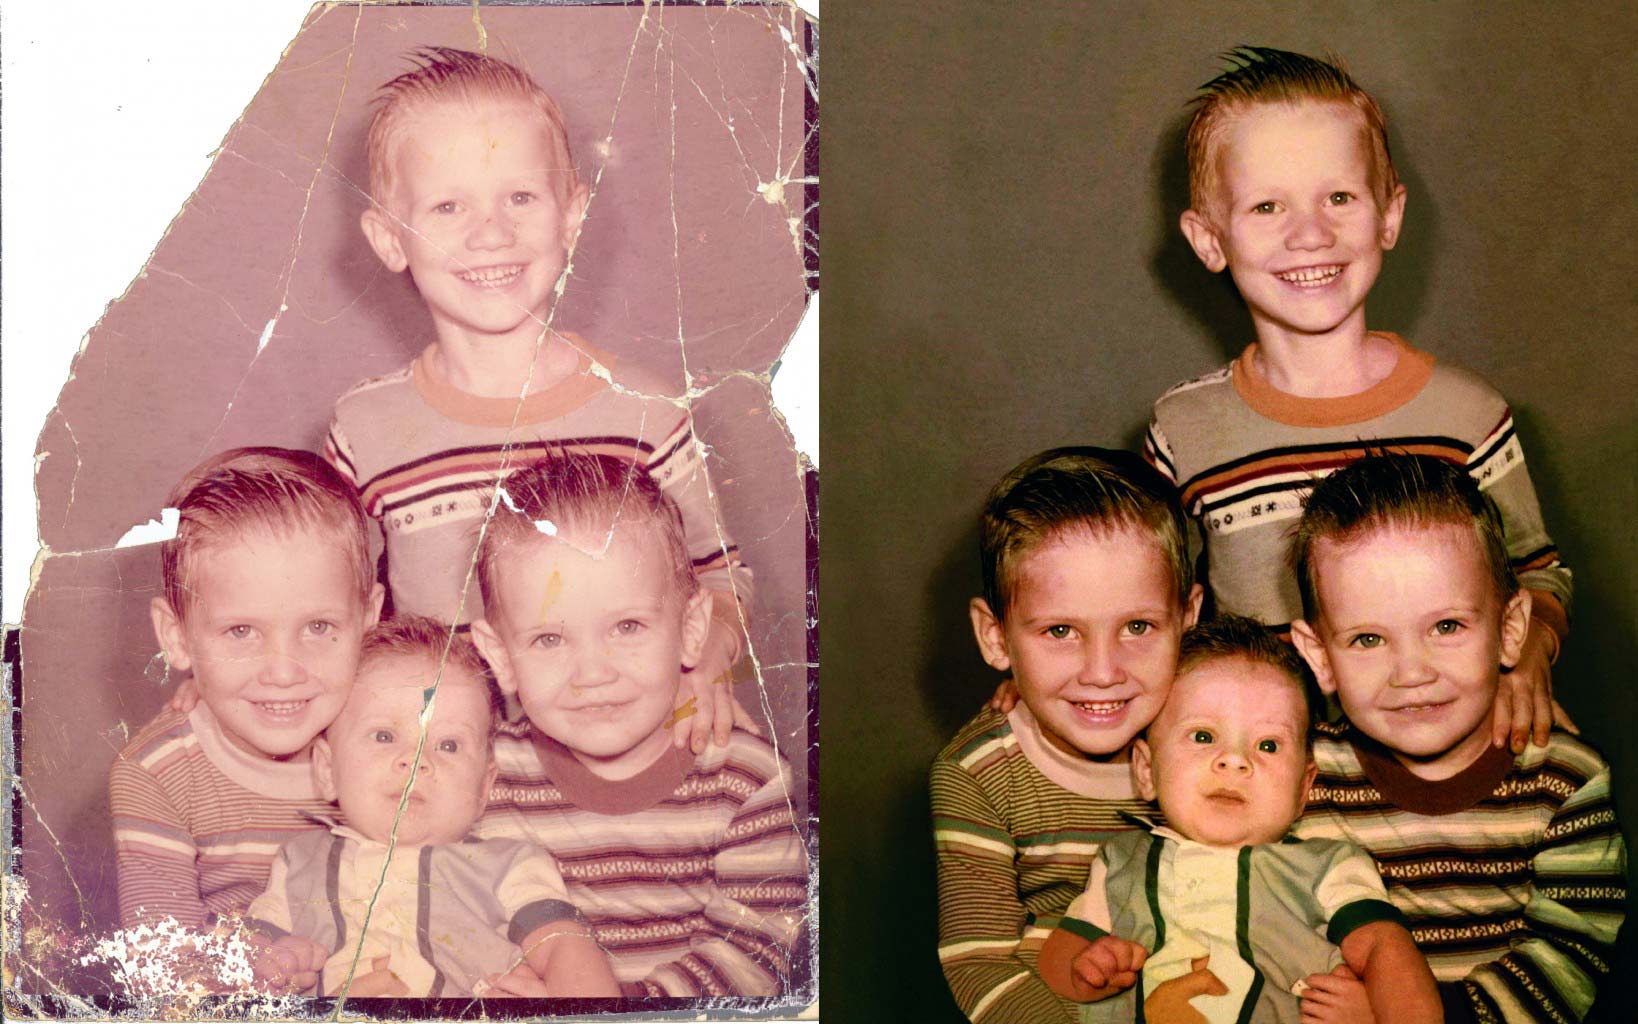 Torn Photo Fix and Repair Old Photo Restoration Service Fix my photo Photoshop Photo Recovery Image Restore